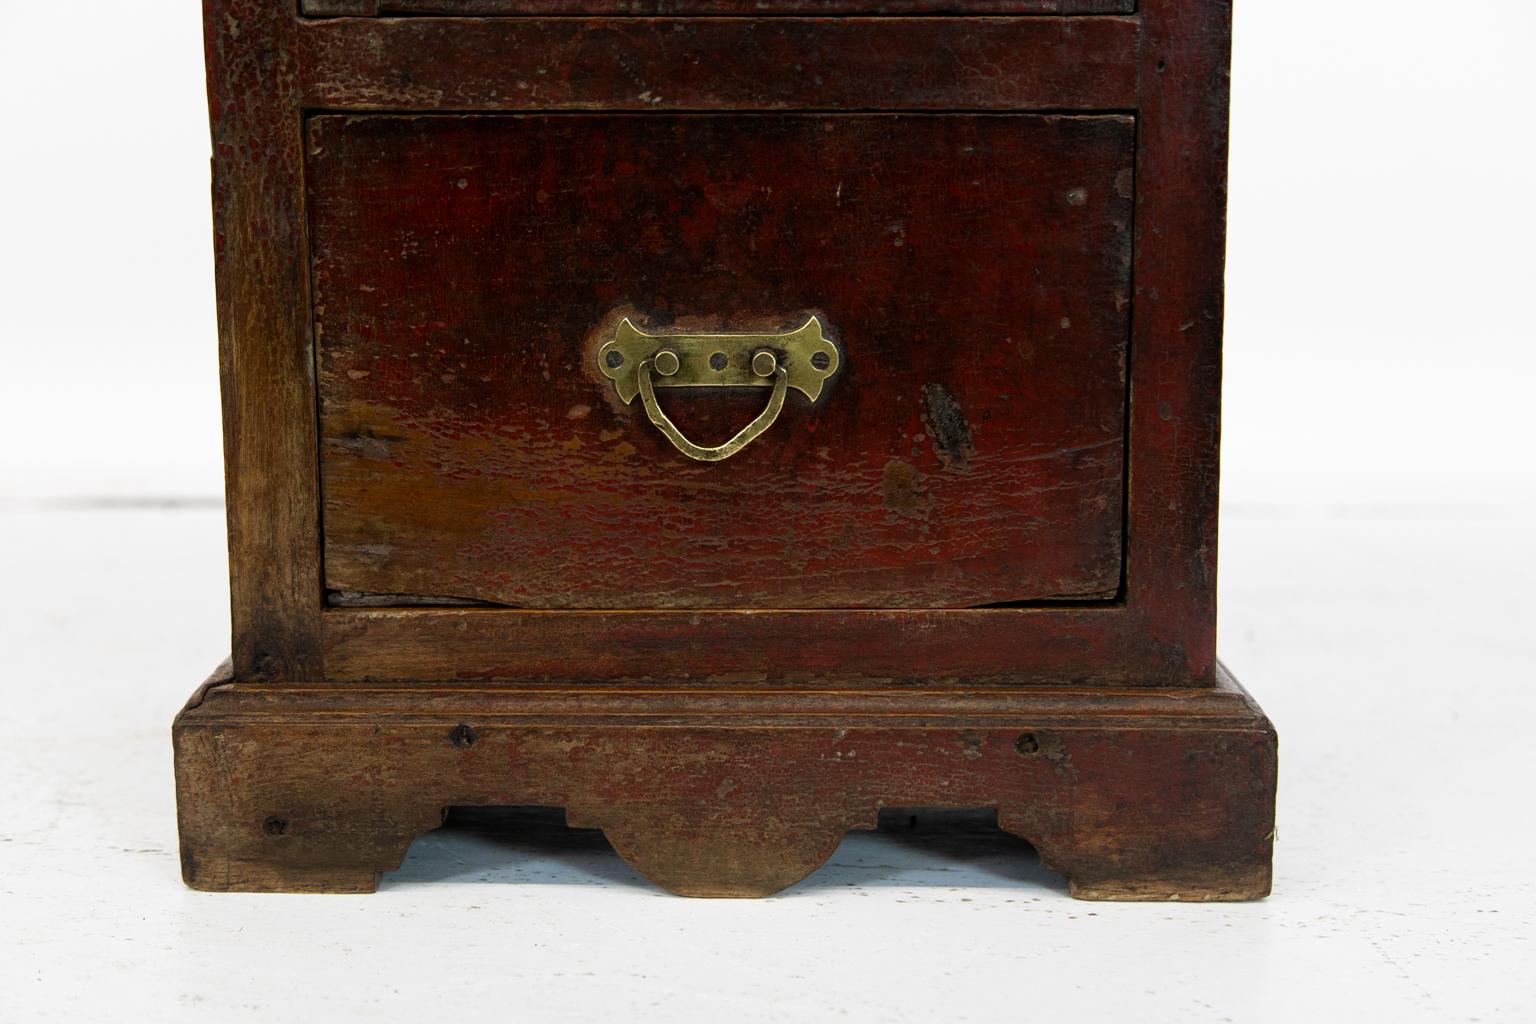 Small European glass door cupboard has paneled sides and its original feet and shaped apron. The top has a carved crest rail.